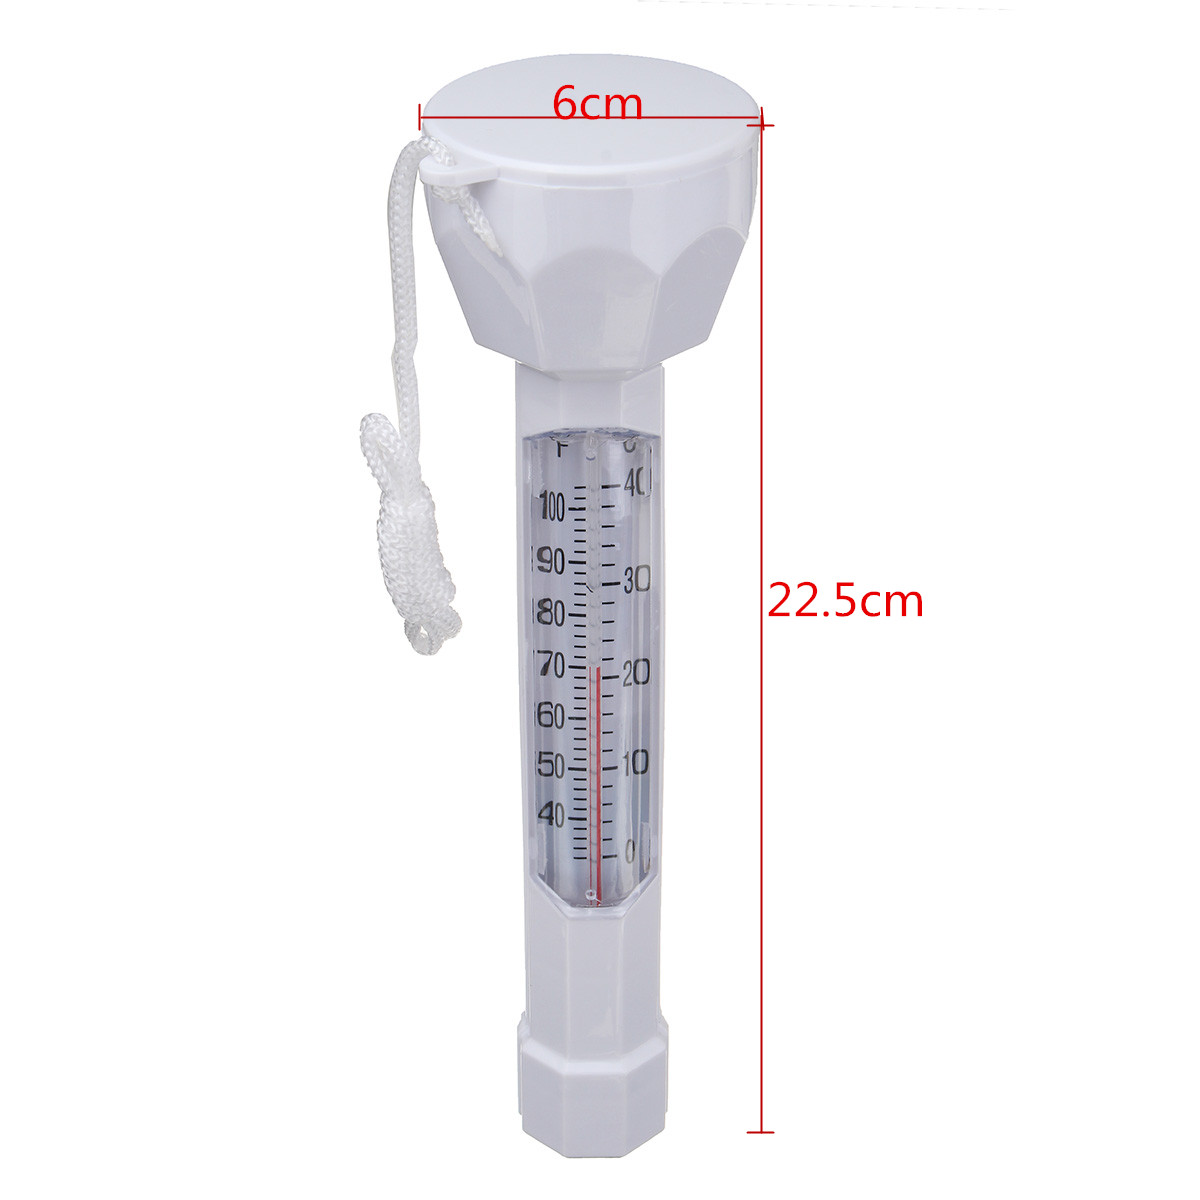 White-Floating-Water-Swimming-Pool-Bath-Spa-Hot-Tub-Temperature-Thermometer--1151459-8